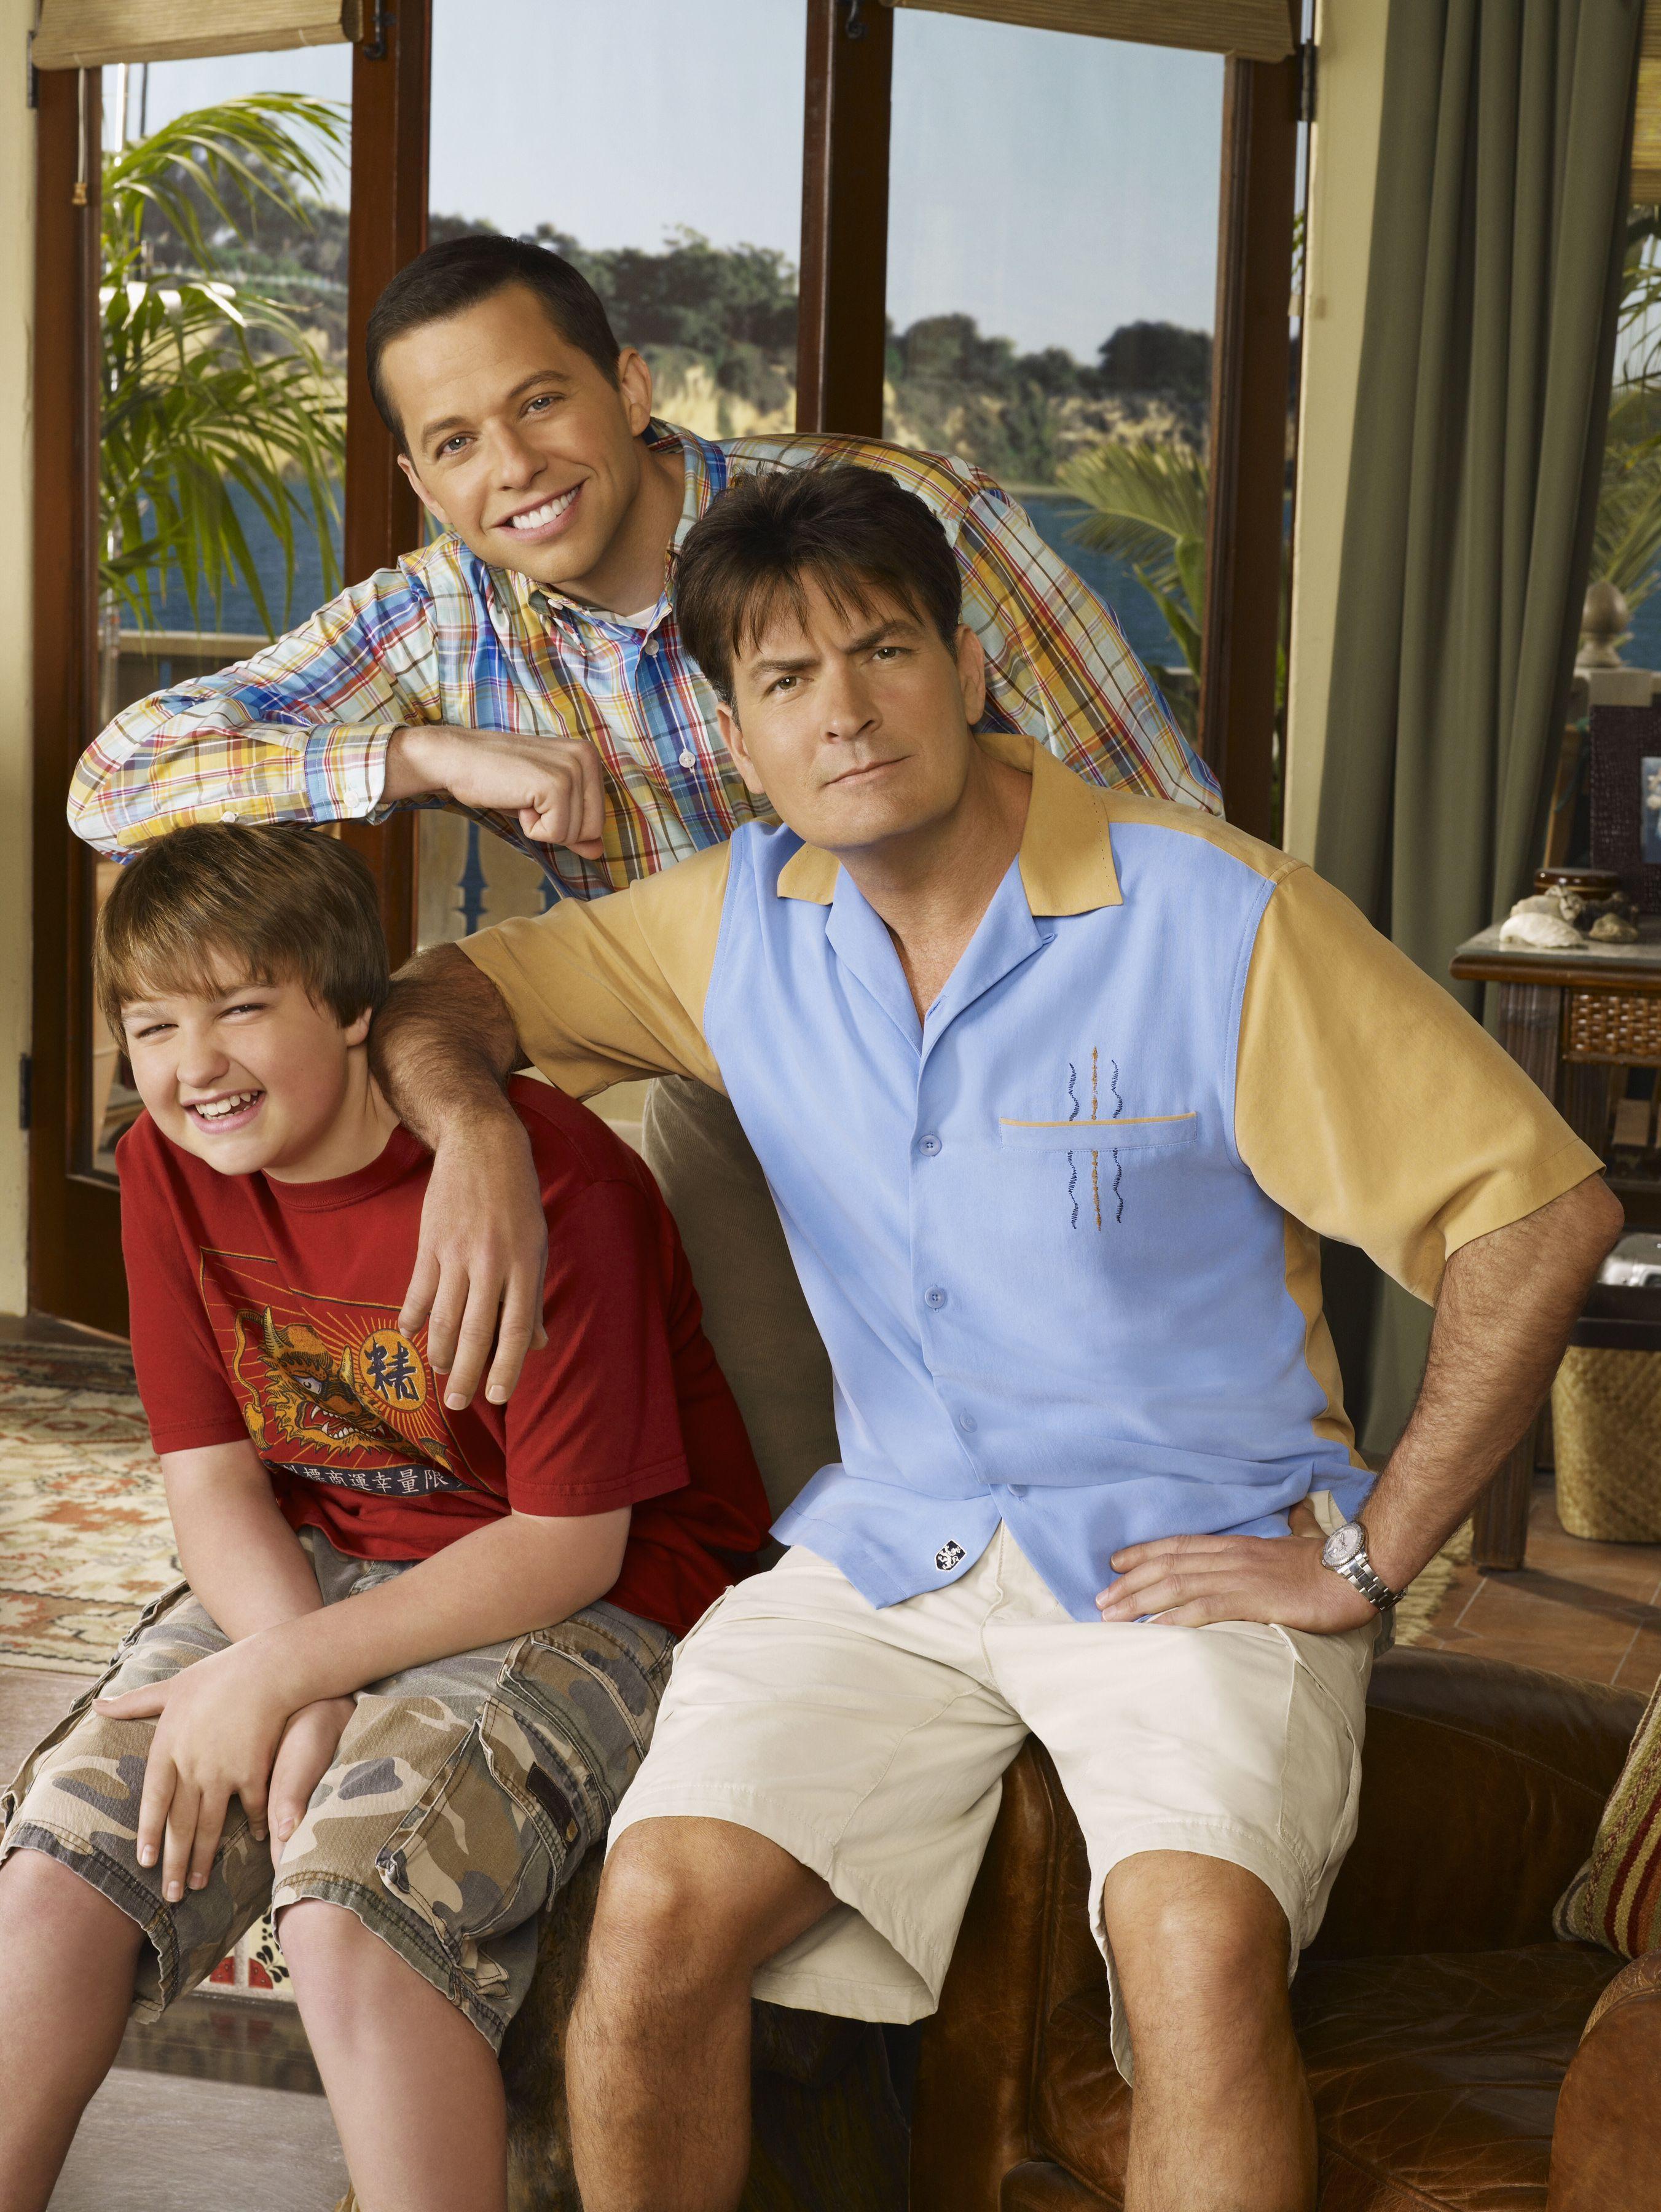 Two and a Half Men Theme Song. Movie Theme Songs & TV Soundtracks